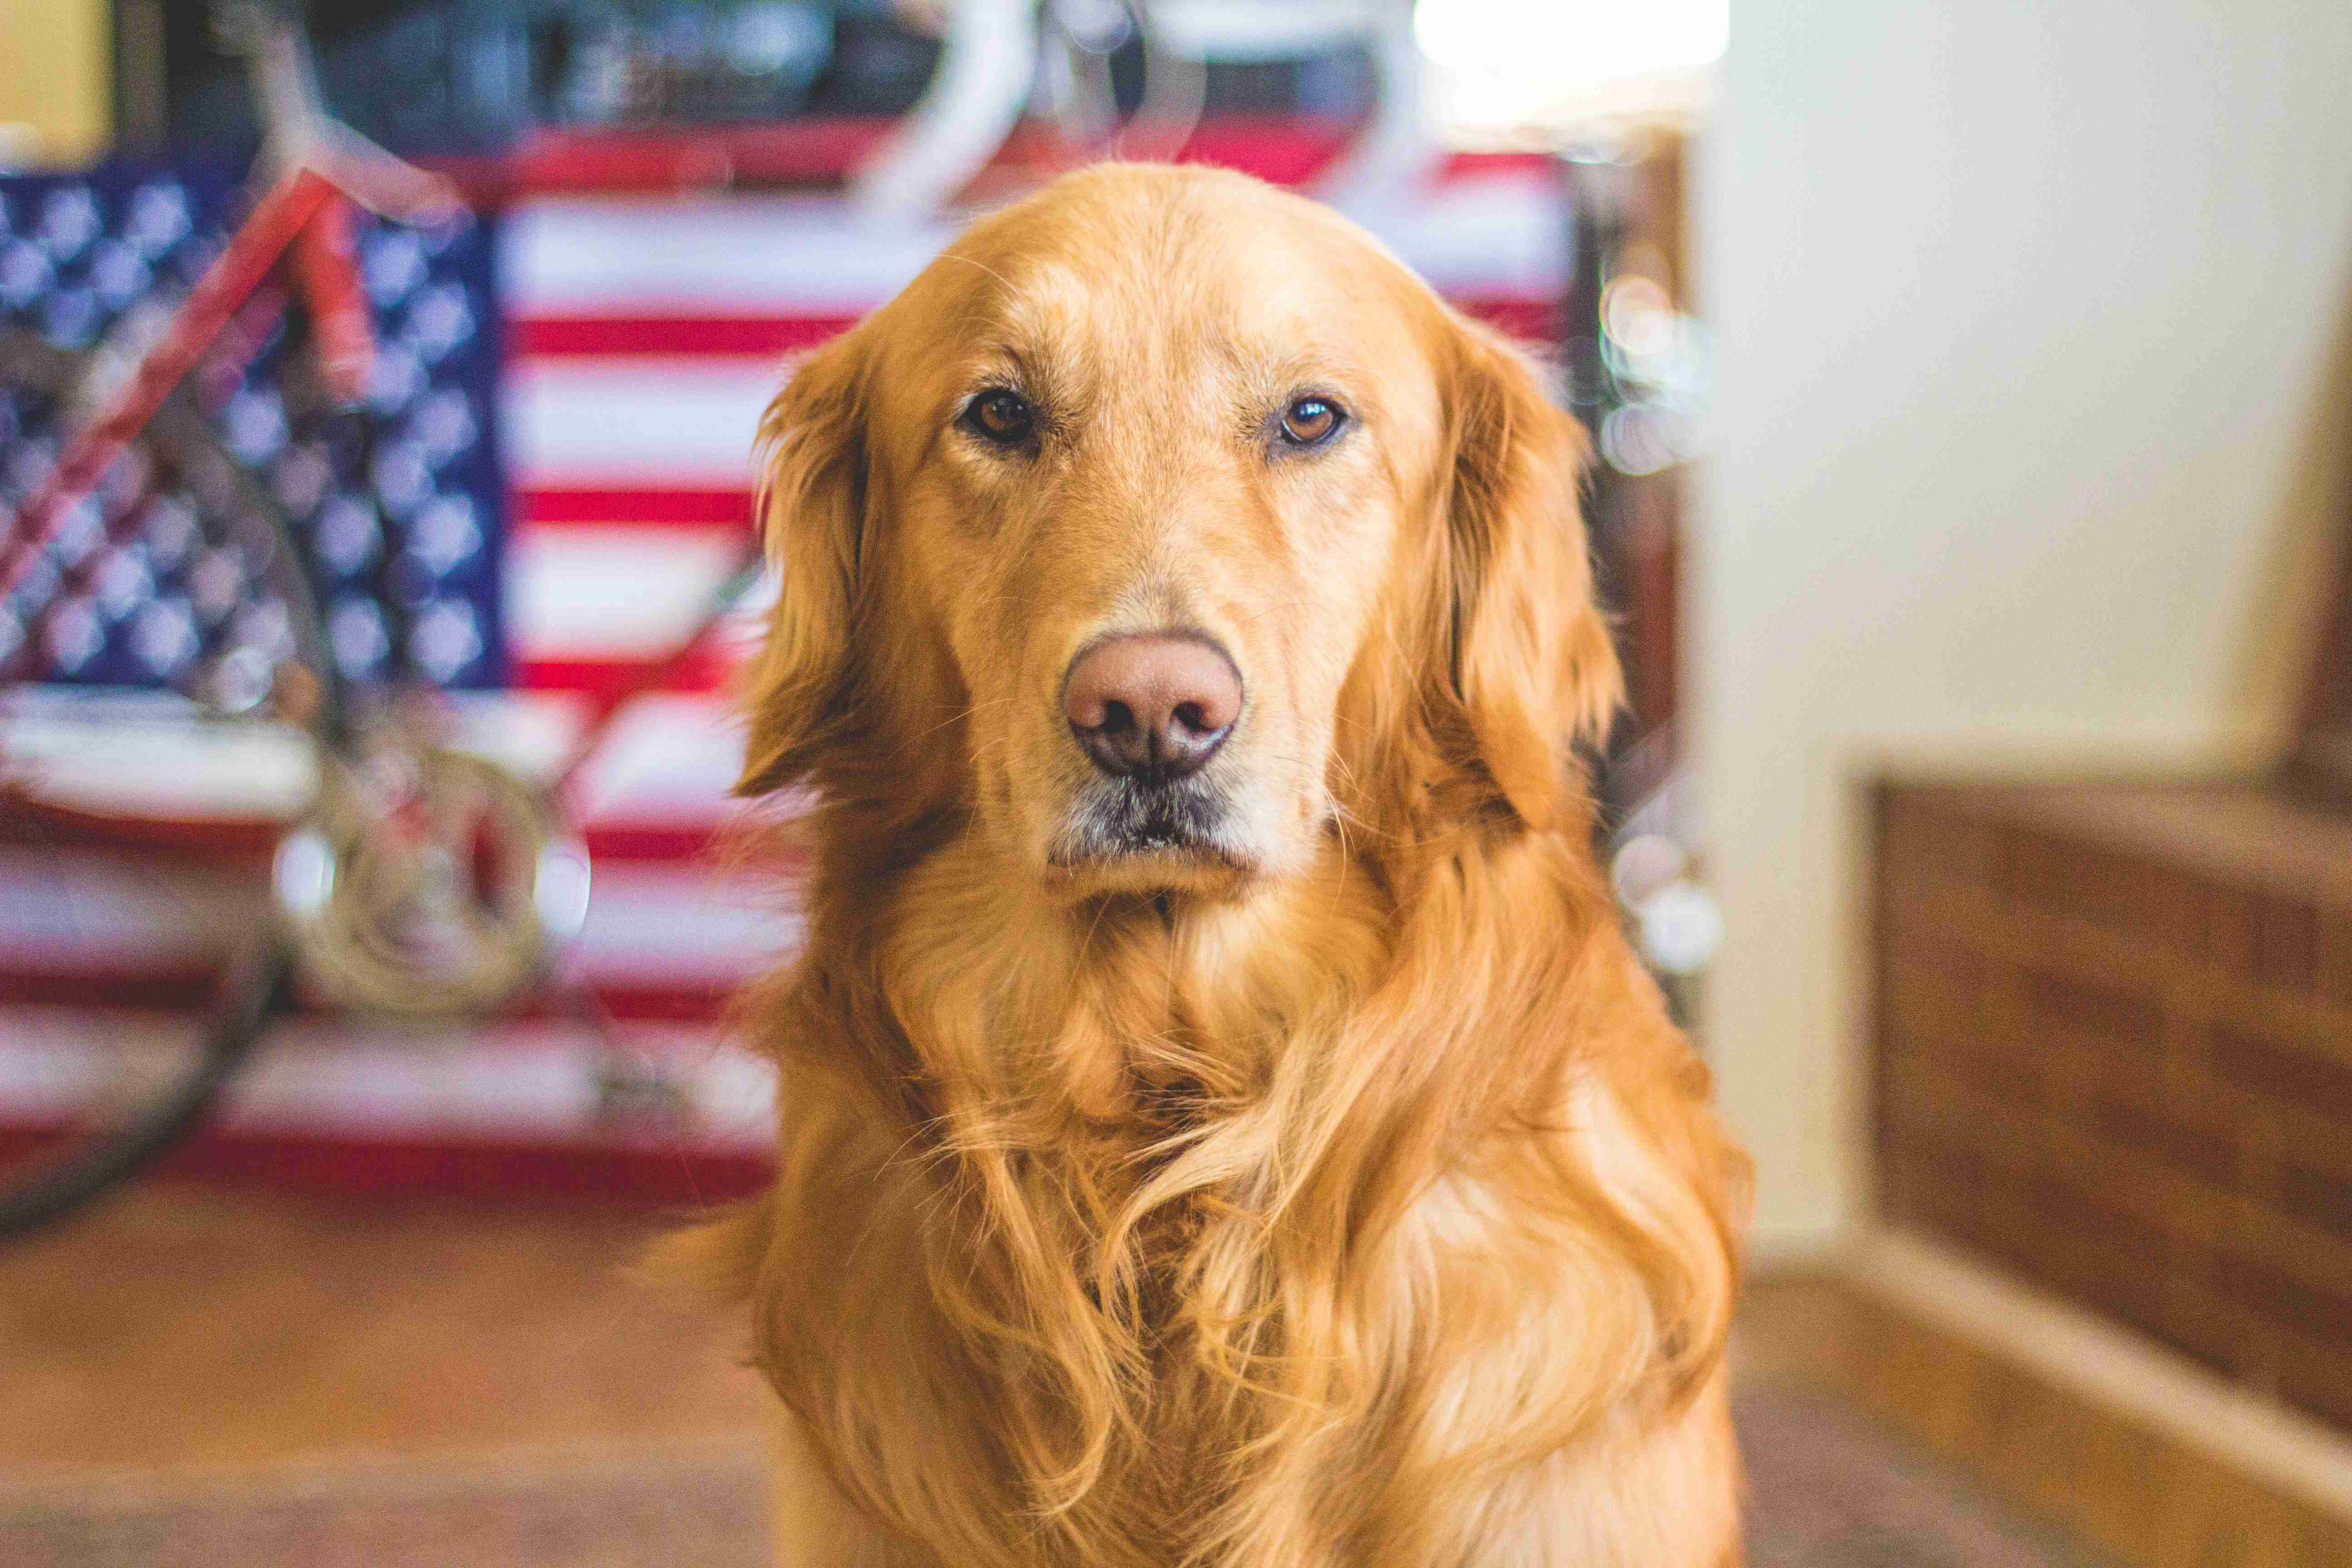 Are there any specific grooming requirements for Golden Retrievers?